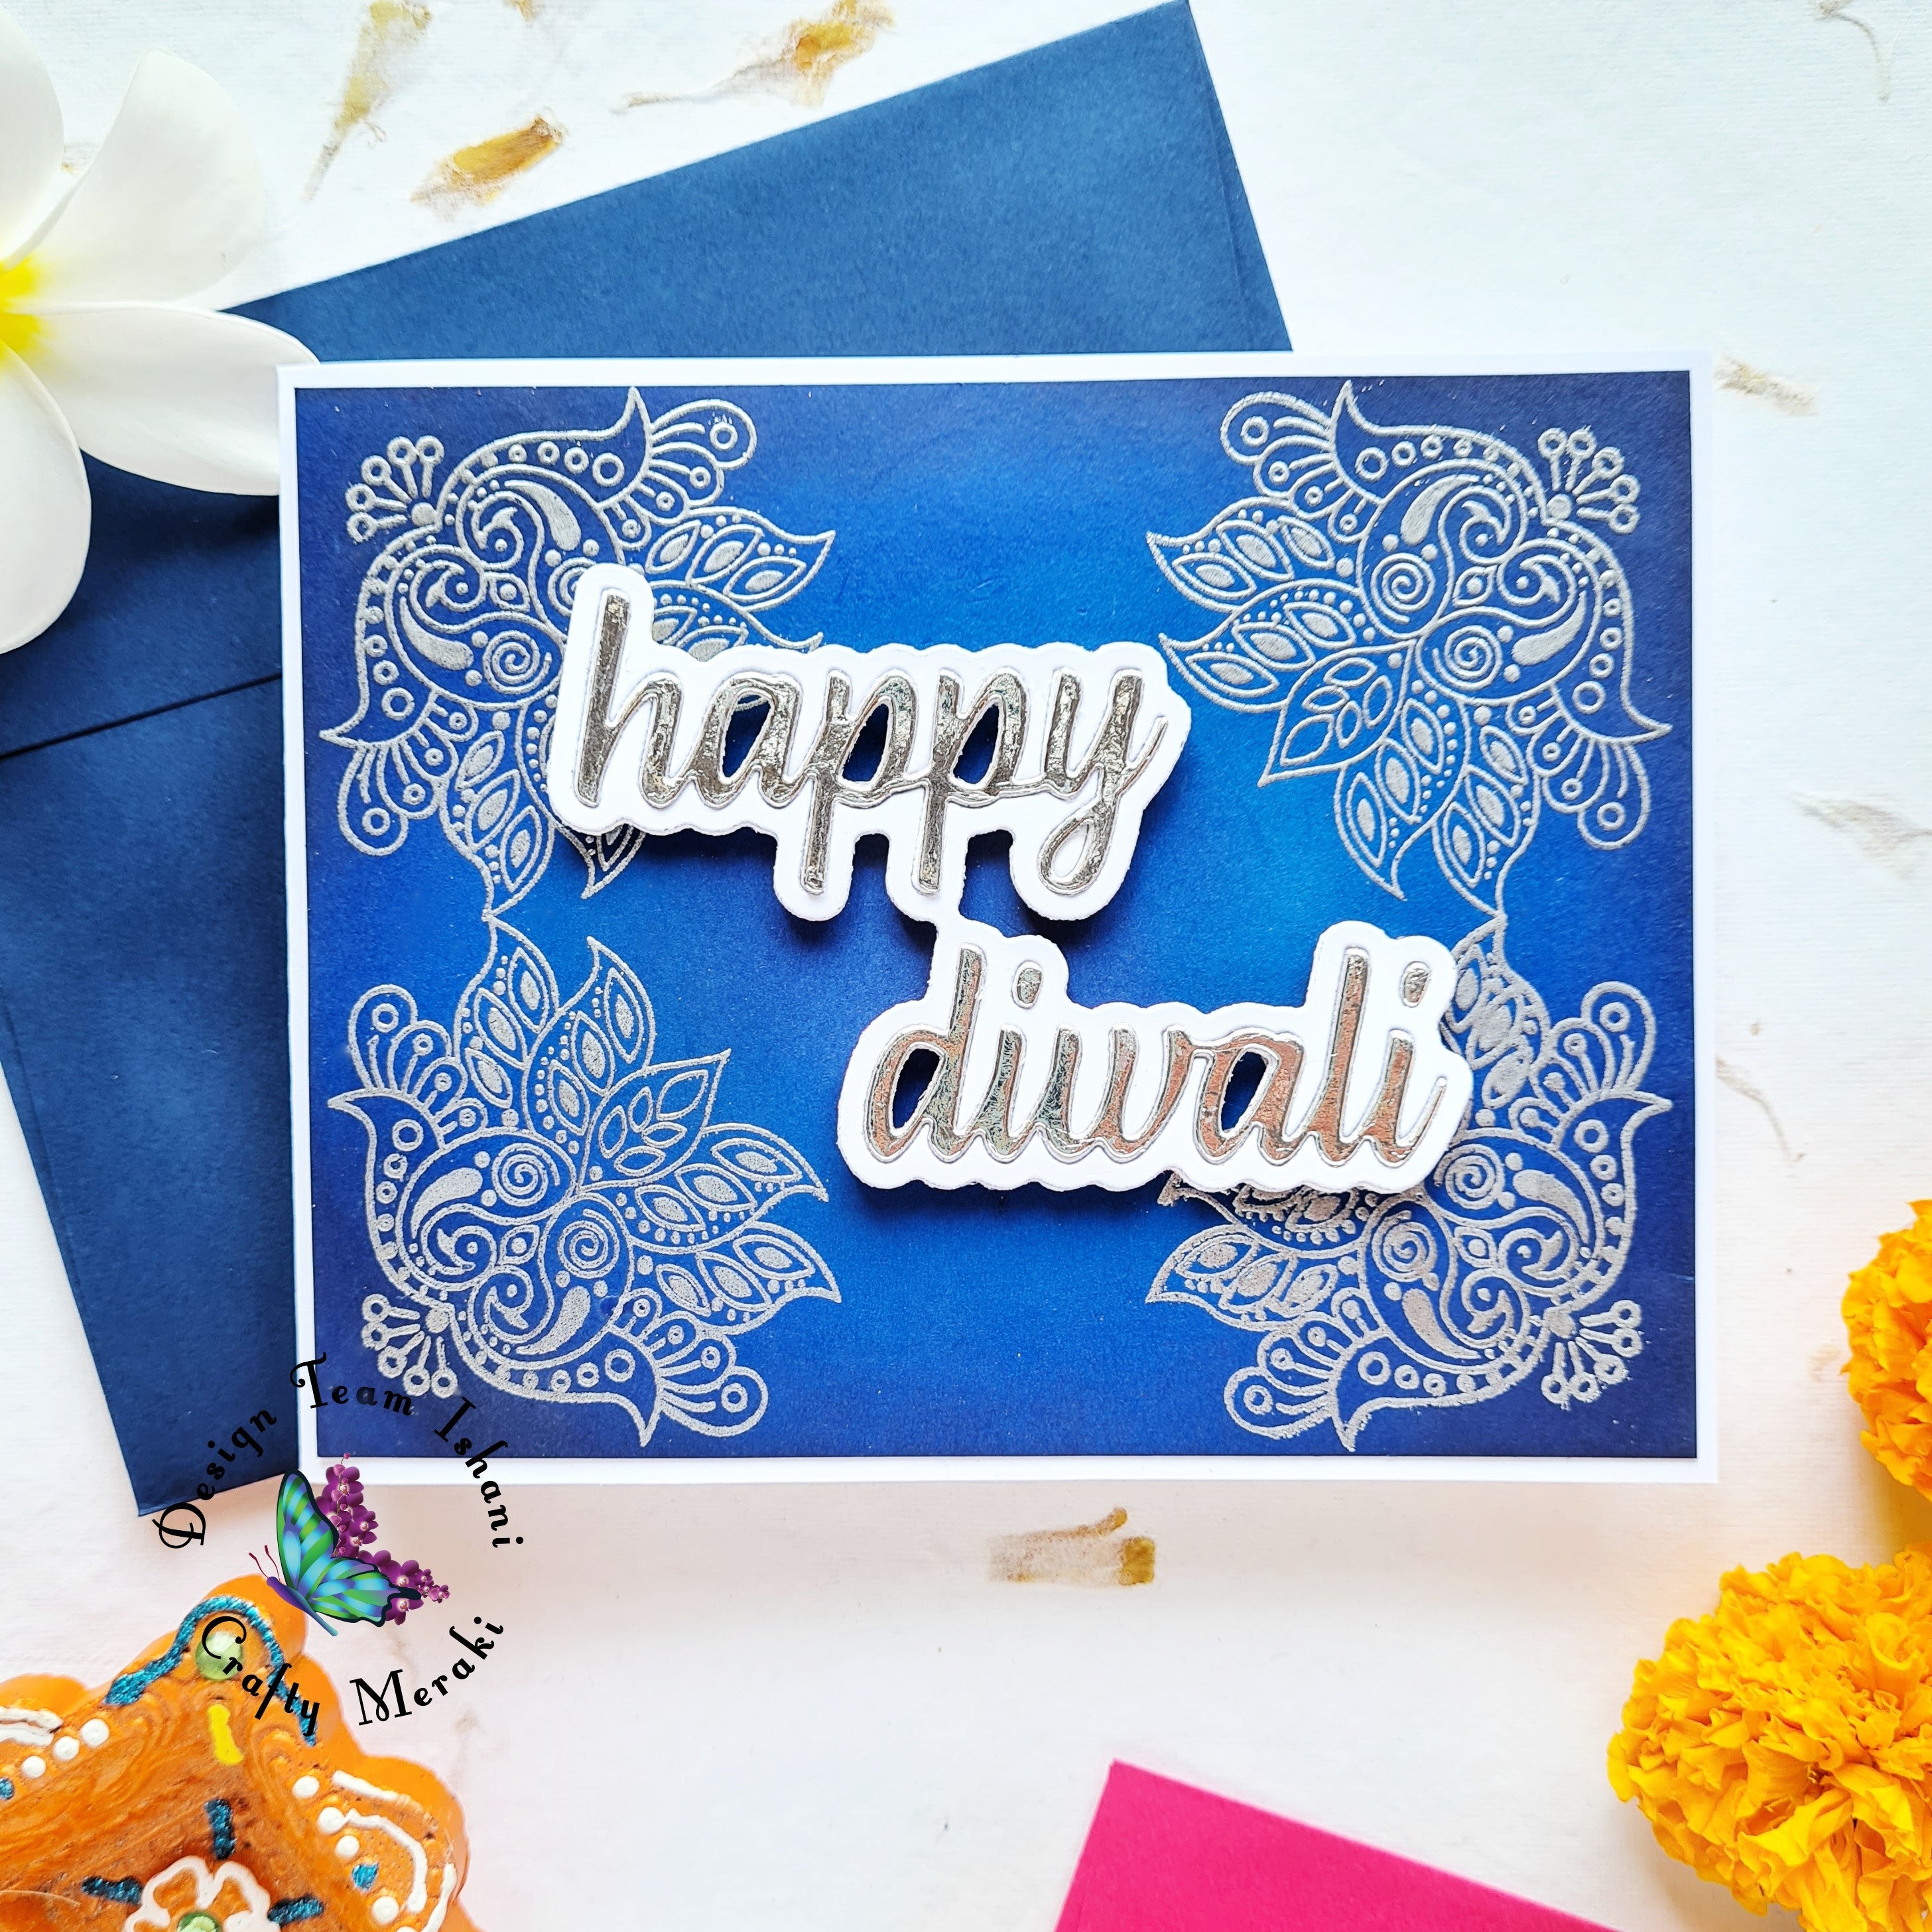 Festive and Easy Diwali Cards